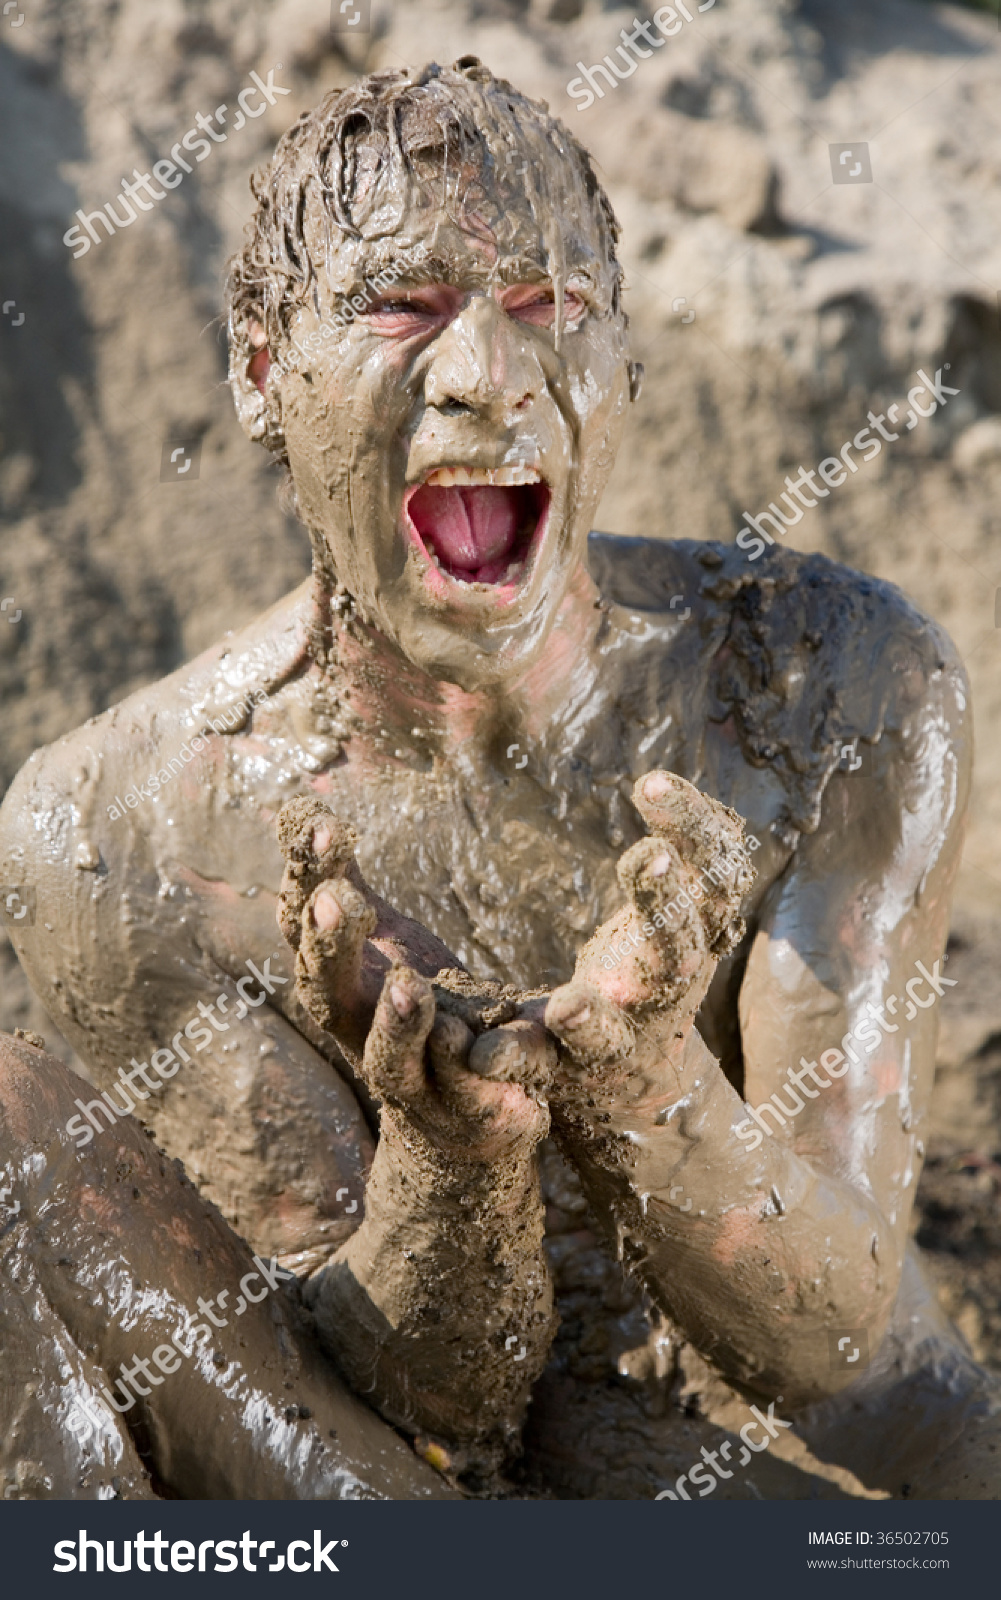 Video Of Naked Woman Covered In Mud 85